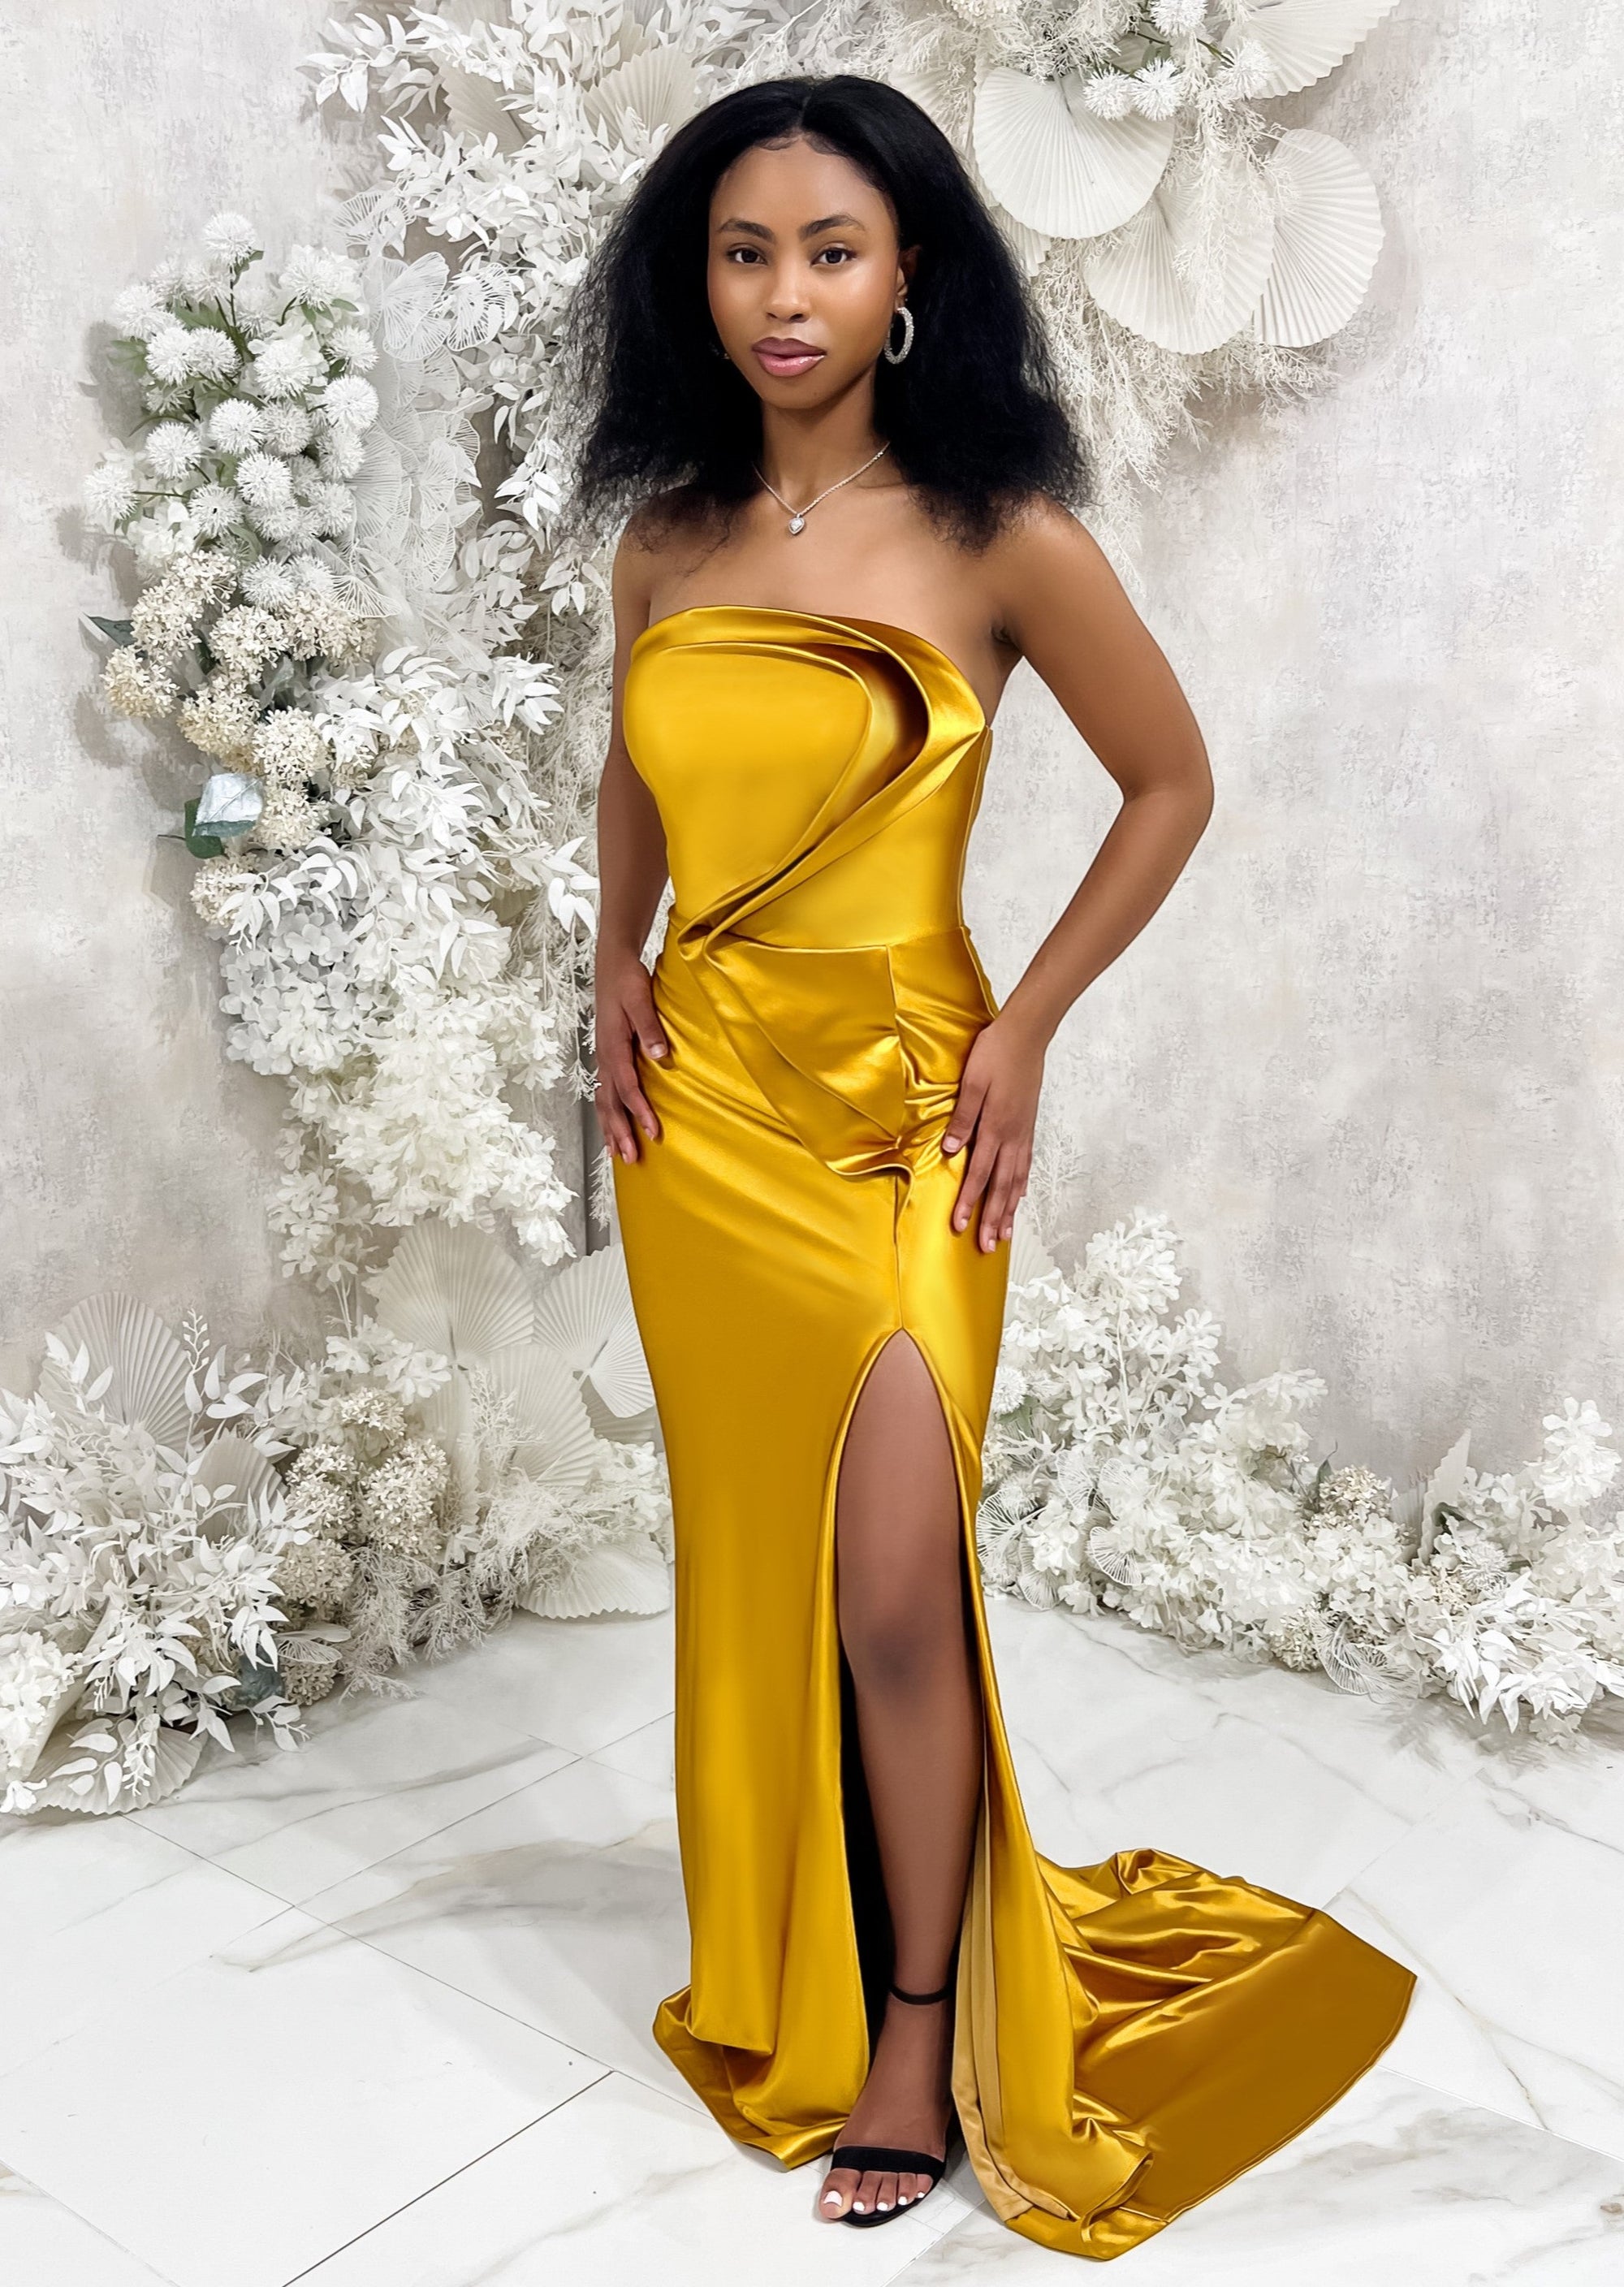 Bridesmaid wearing a modern strapless fitted bridesmaids dress with stretch. Dress has a slit at the leg, curved architectural detailing, and is shown in a golden vibrant yellow on a black model. plus size bridesmaid dress